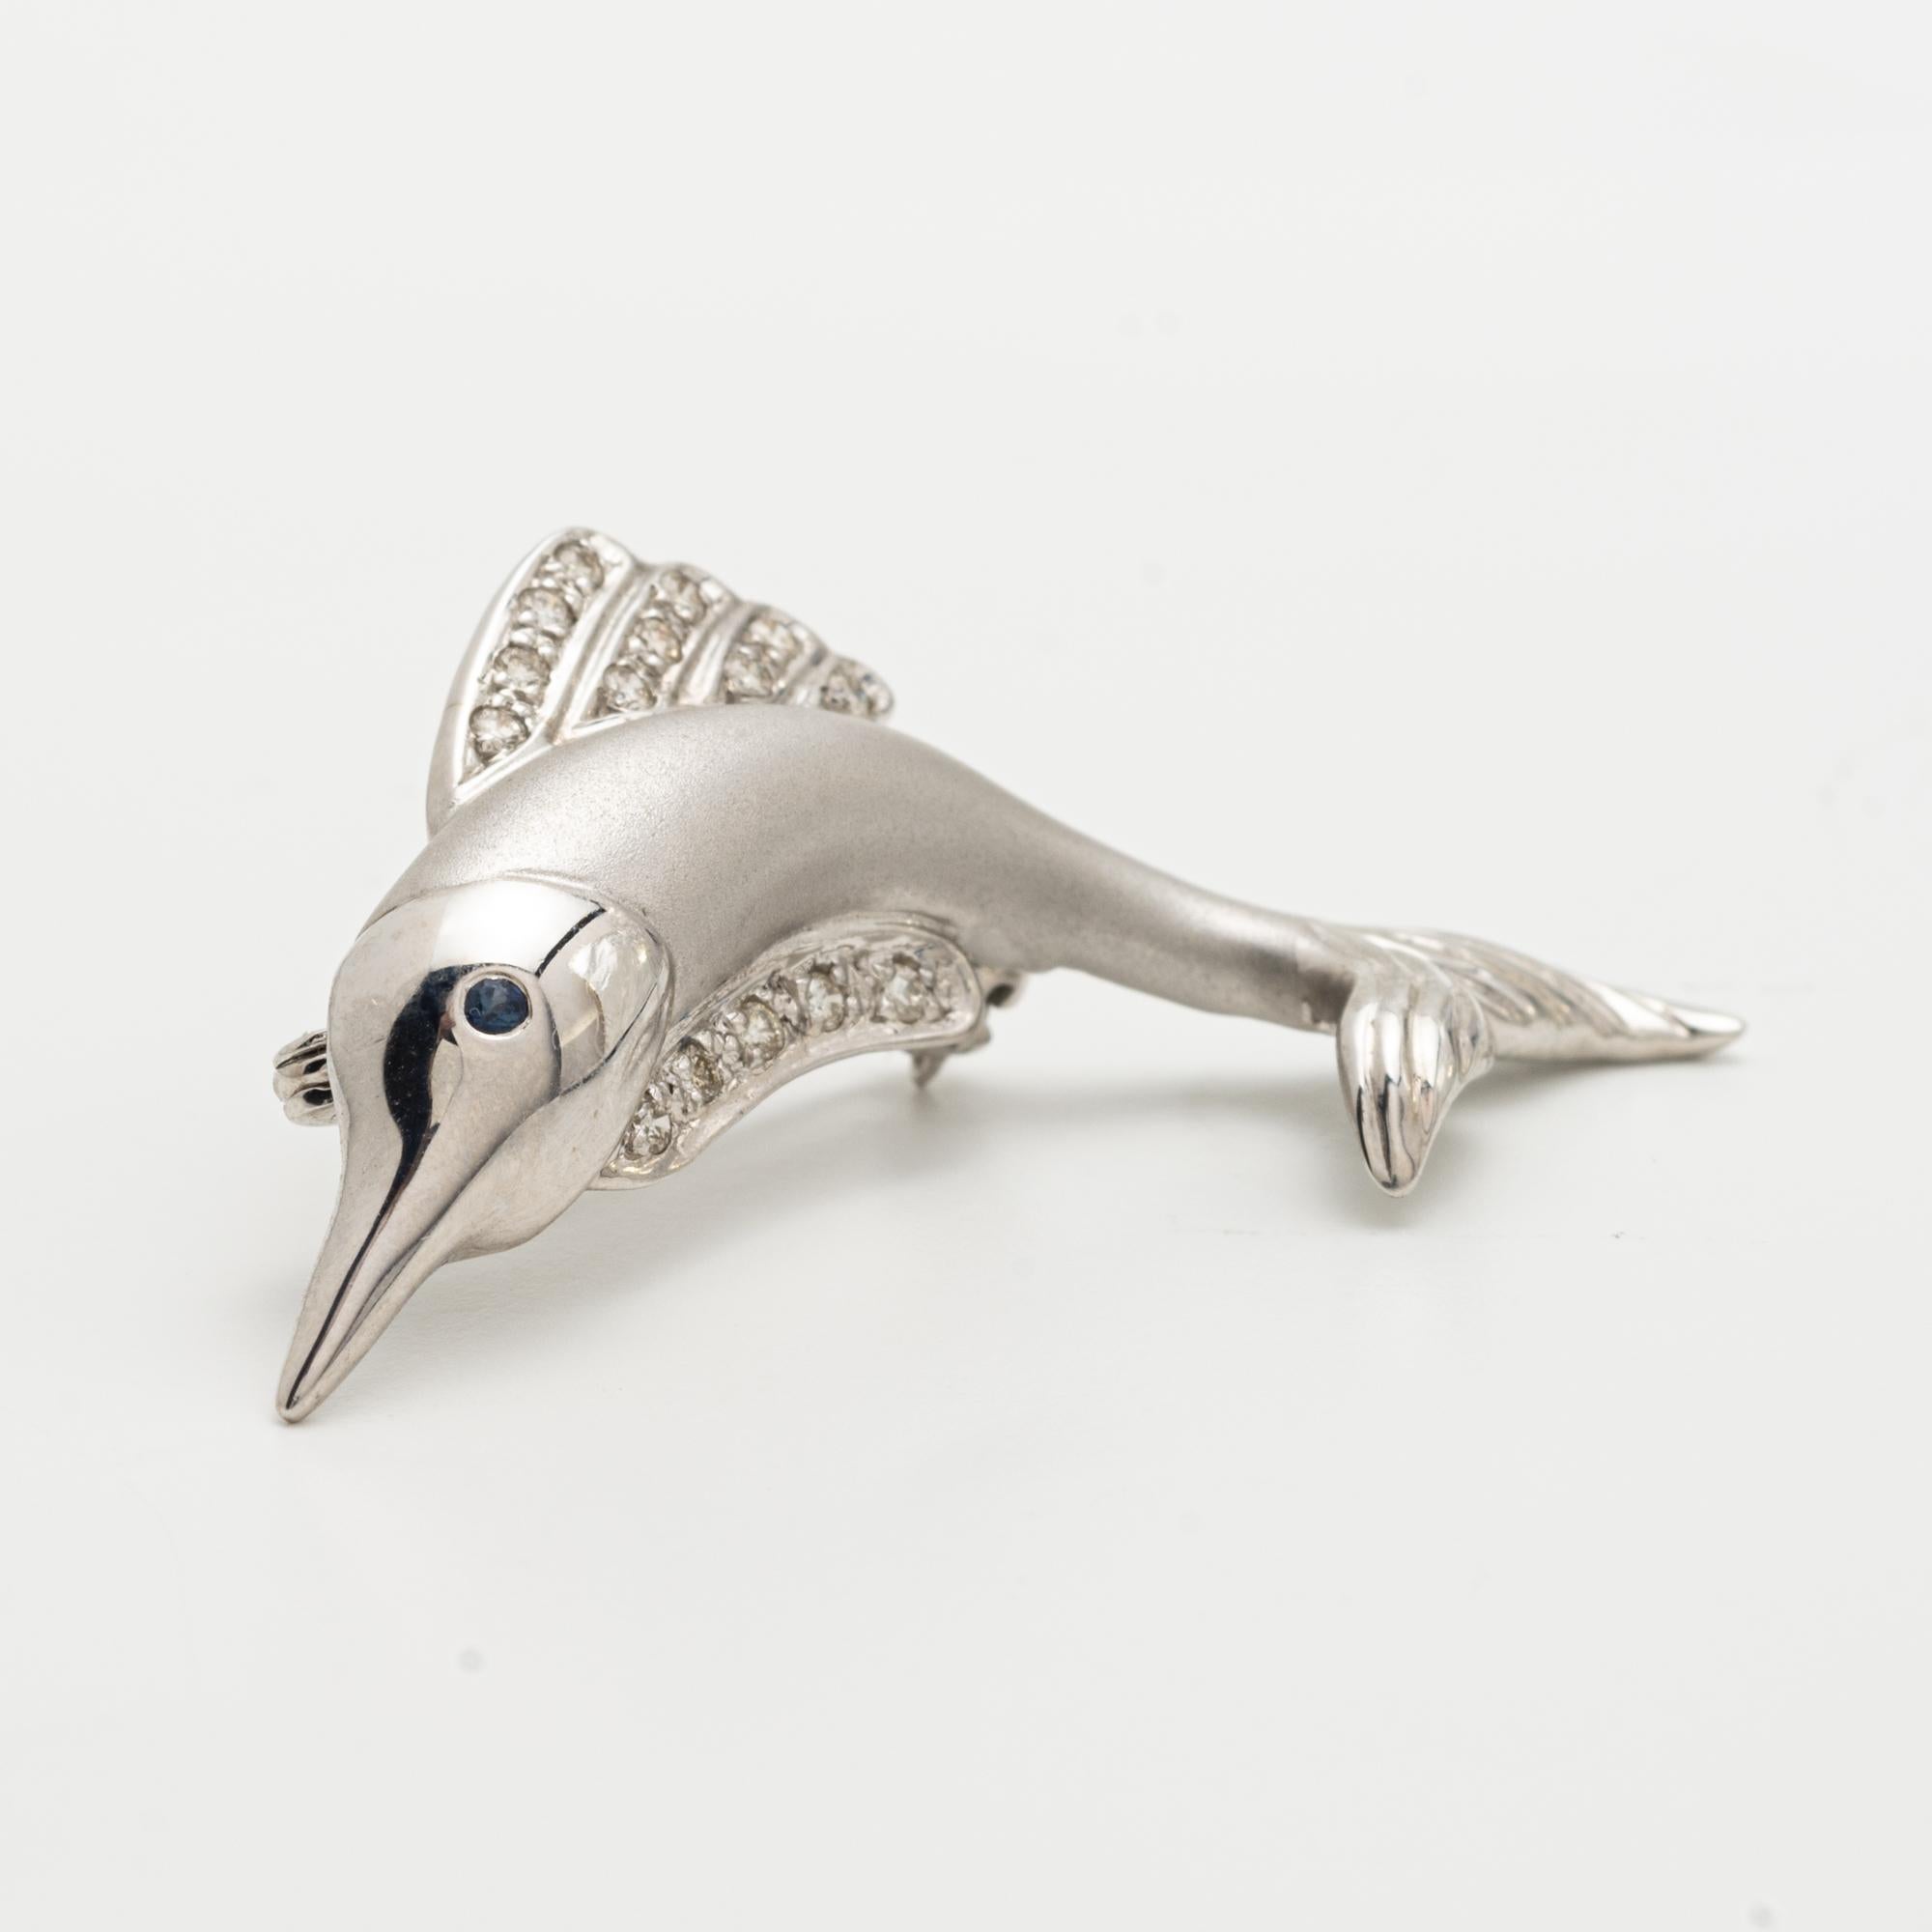 
White Gold and Diamond Fish Brooch 
14 Karat Gold and Diamond Fish Brooch, the fish set with numerous diamonds, with a colored stone eye, 1.56 inches
